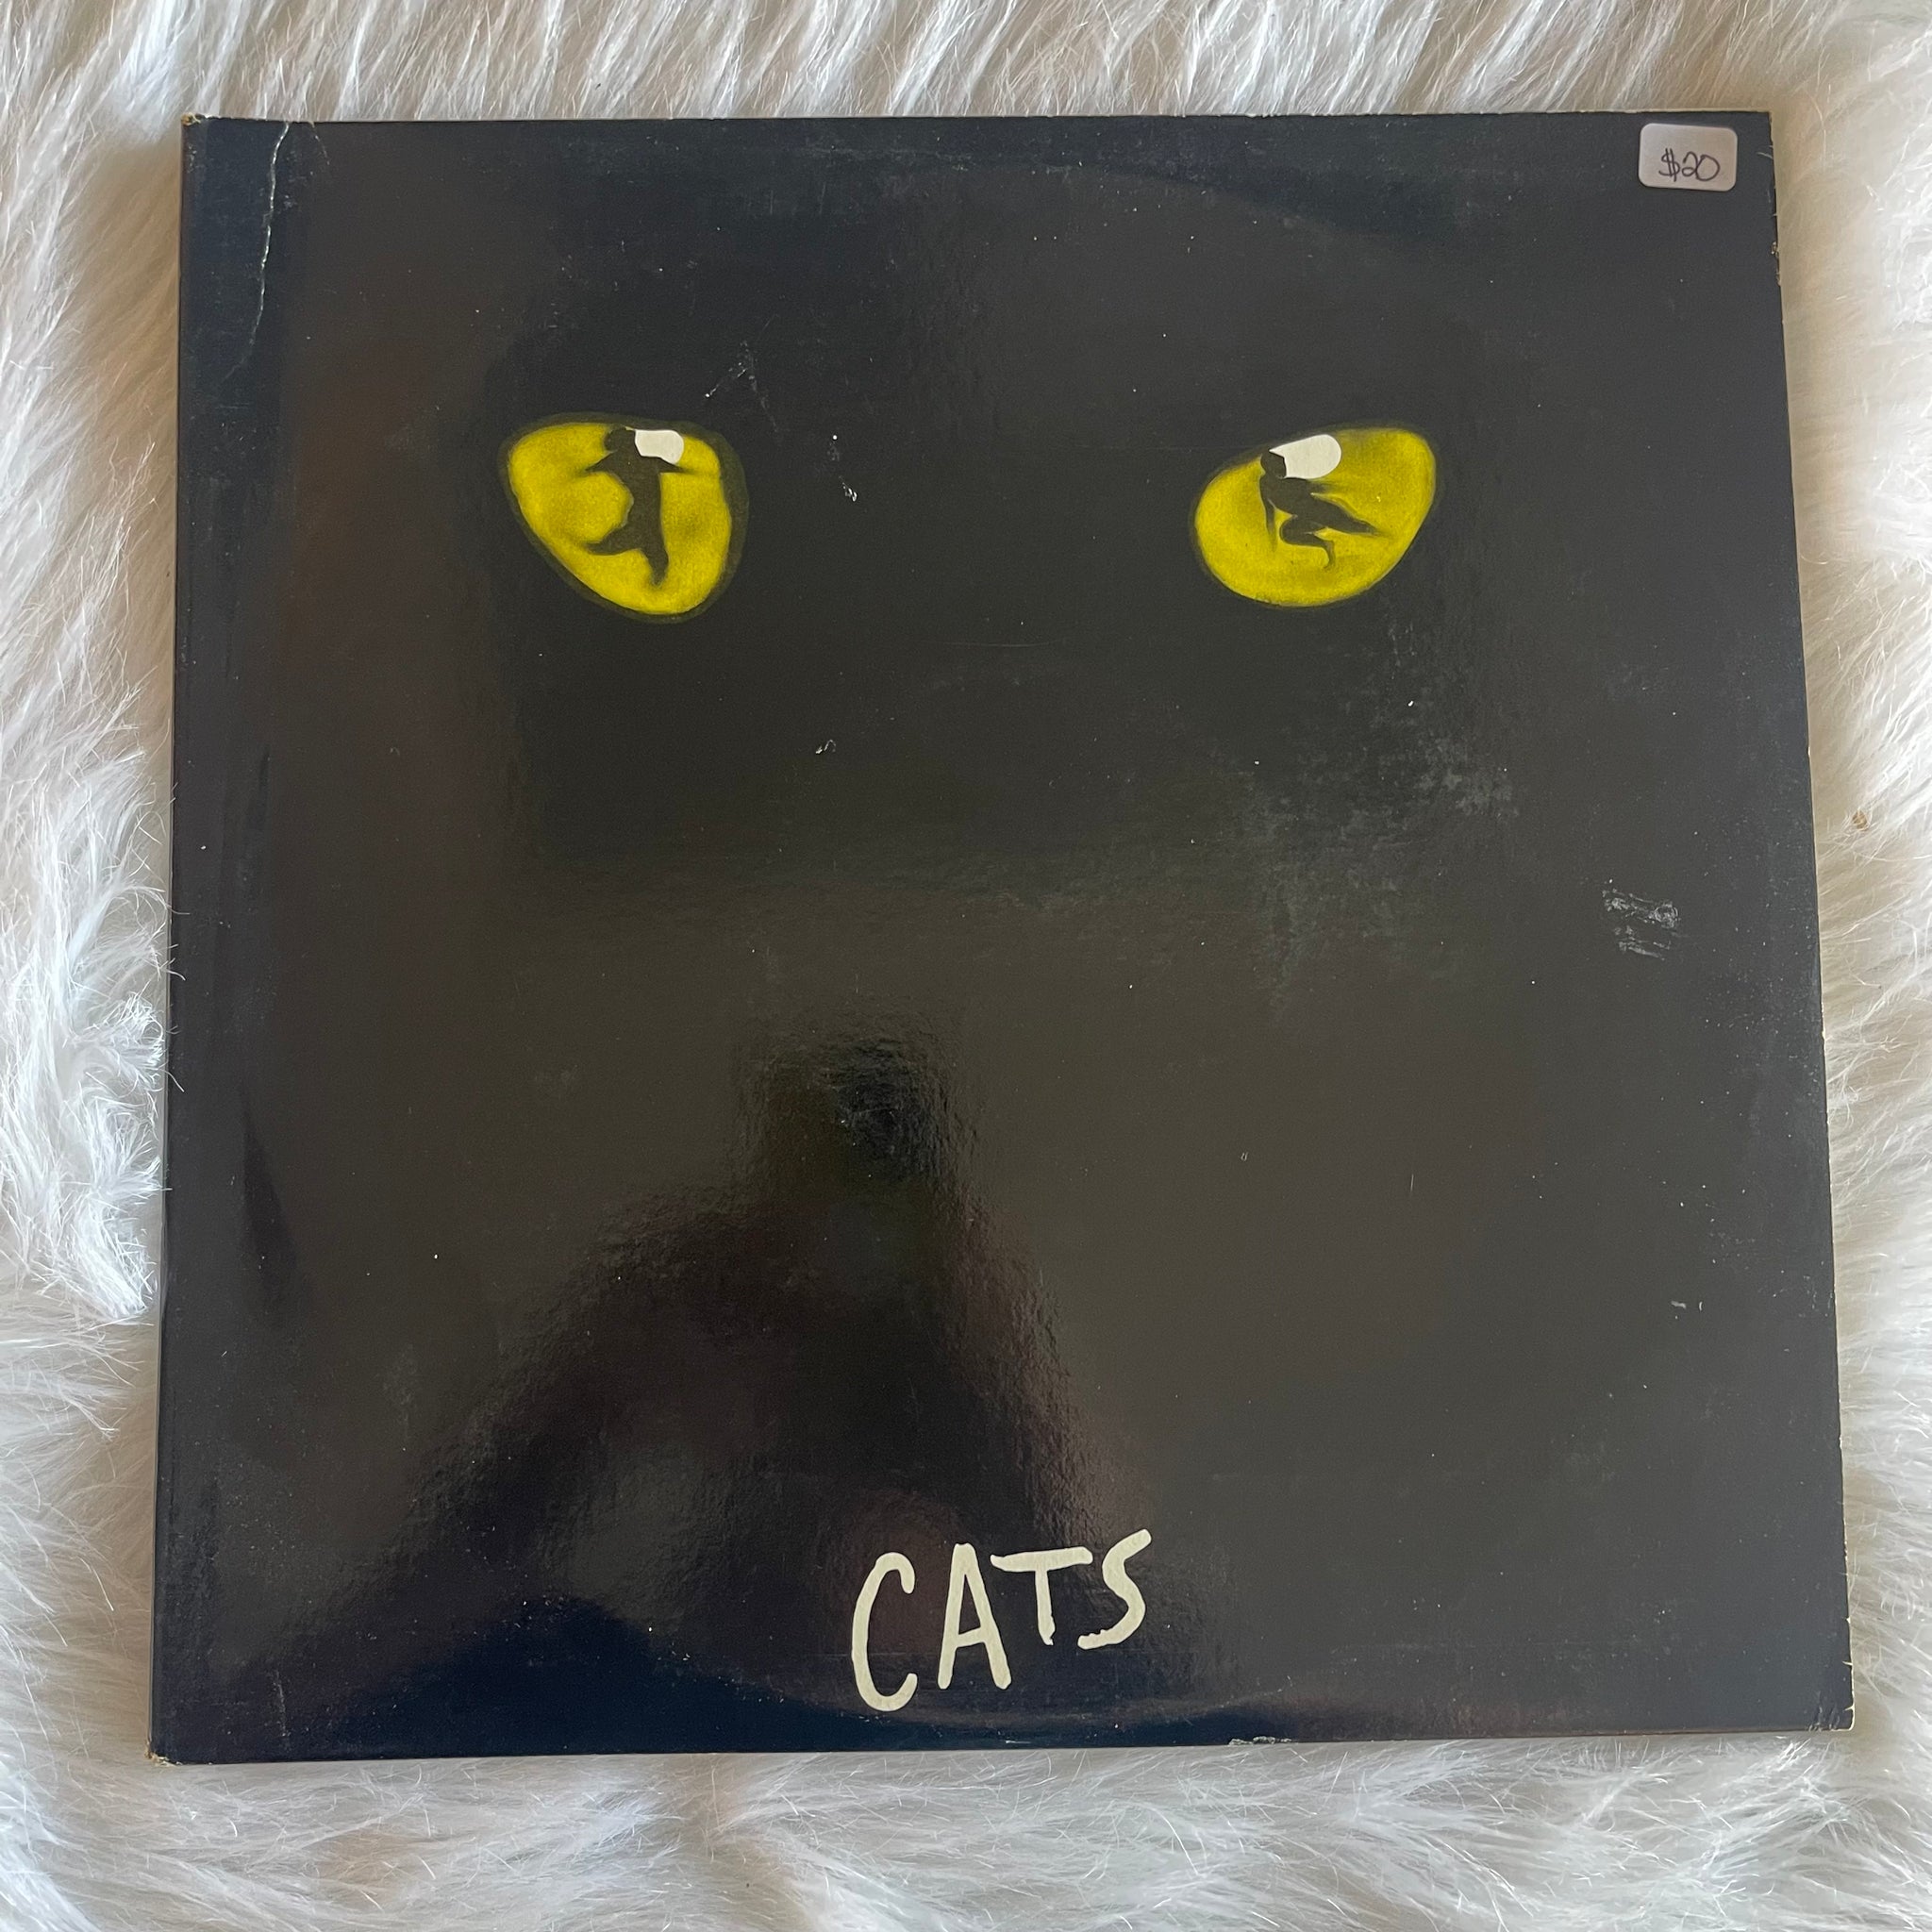 Cats-Music by Andrew Lloyd Webber